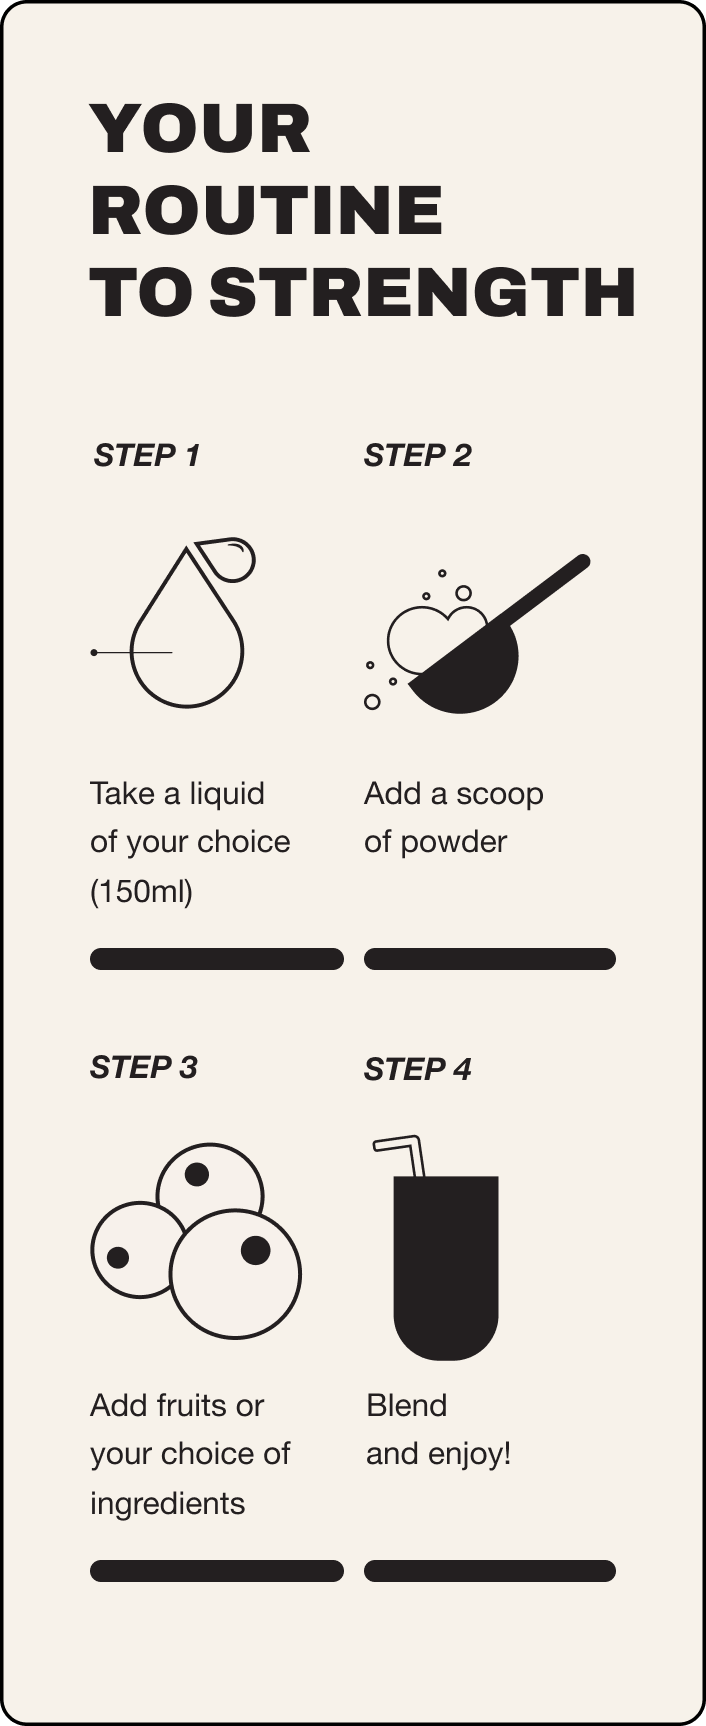 Your guide to strength. Step 1 take a liquid of your choice 150ml, step 2 add a scoop of powder, step 3 add fruits or your choice of ingredients, step 4 blend and enjoy!